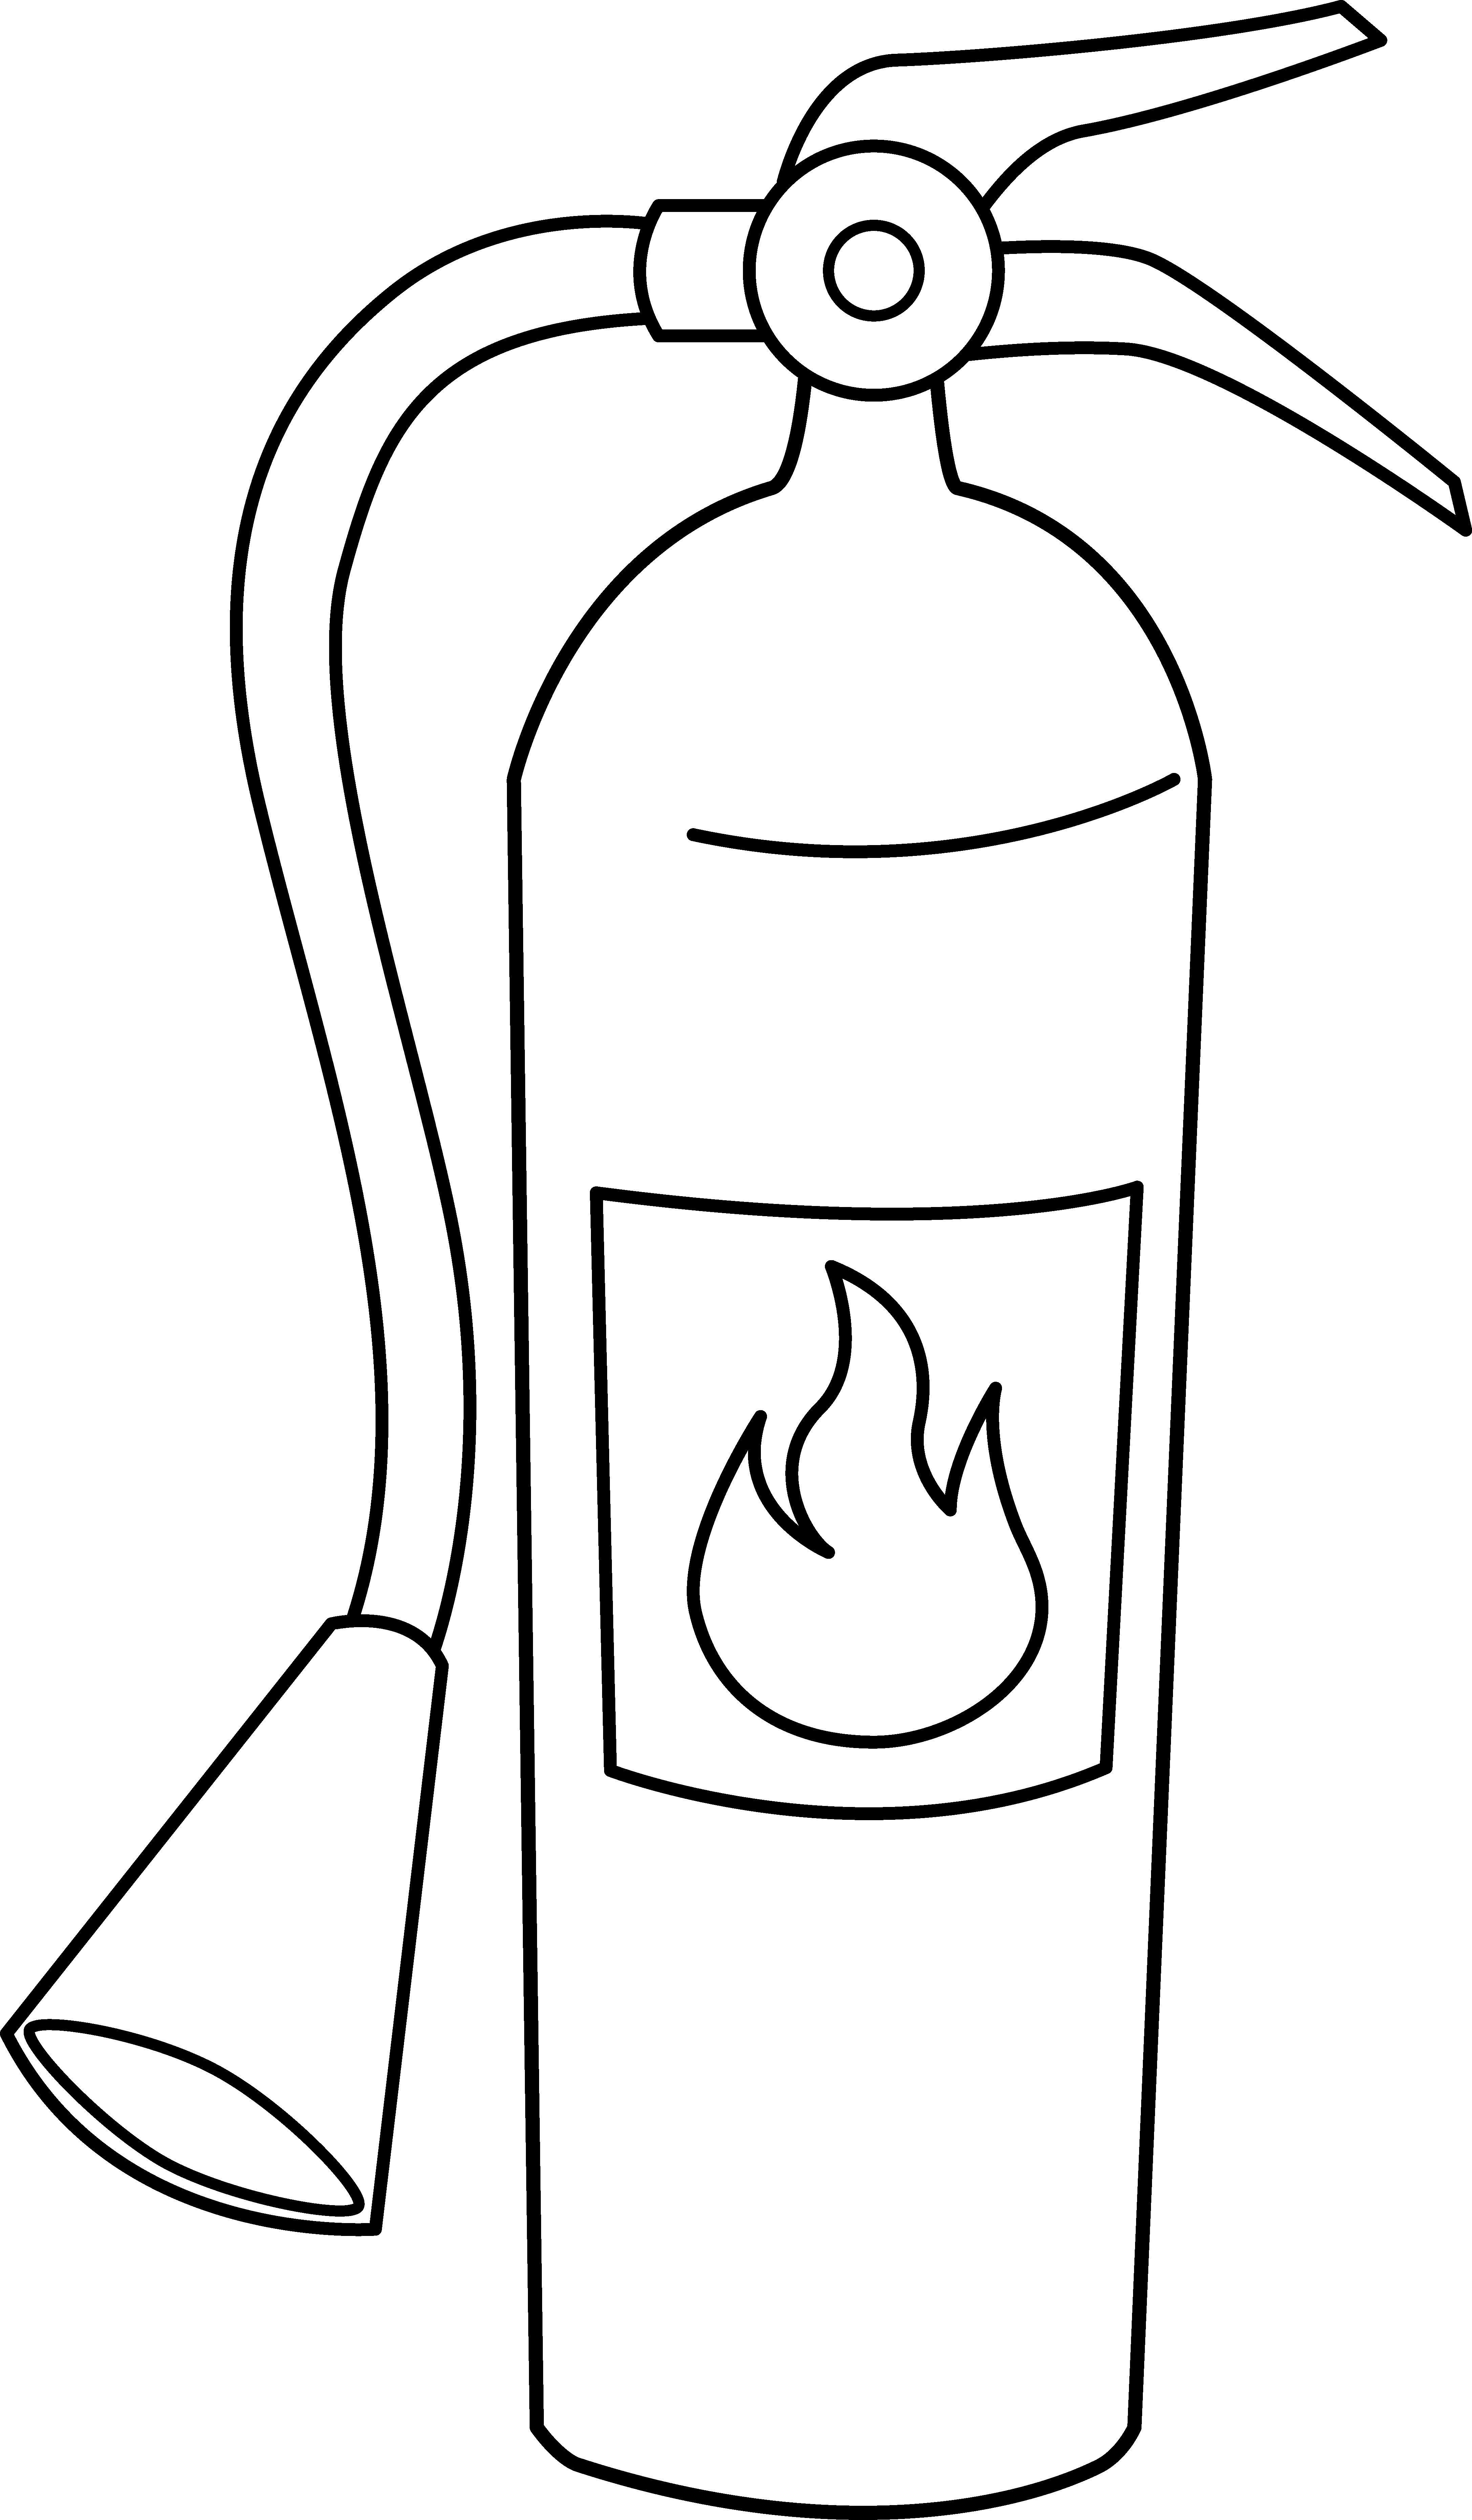 Fireman clipart colouring page. Fire hydrant coloring with